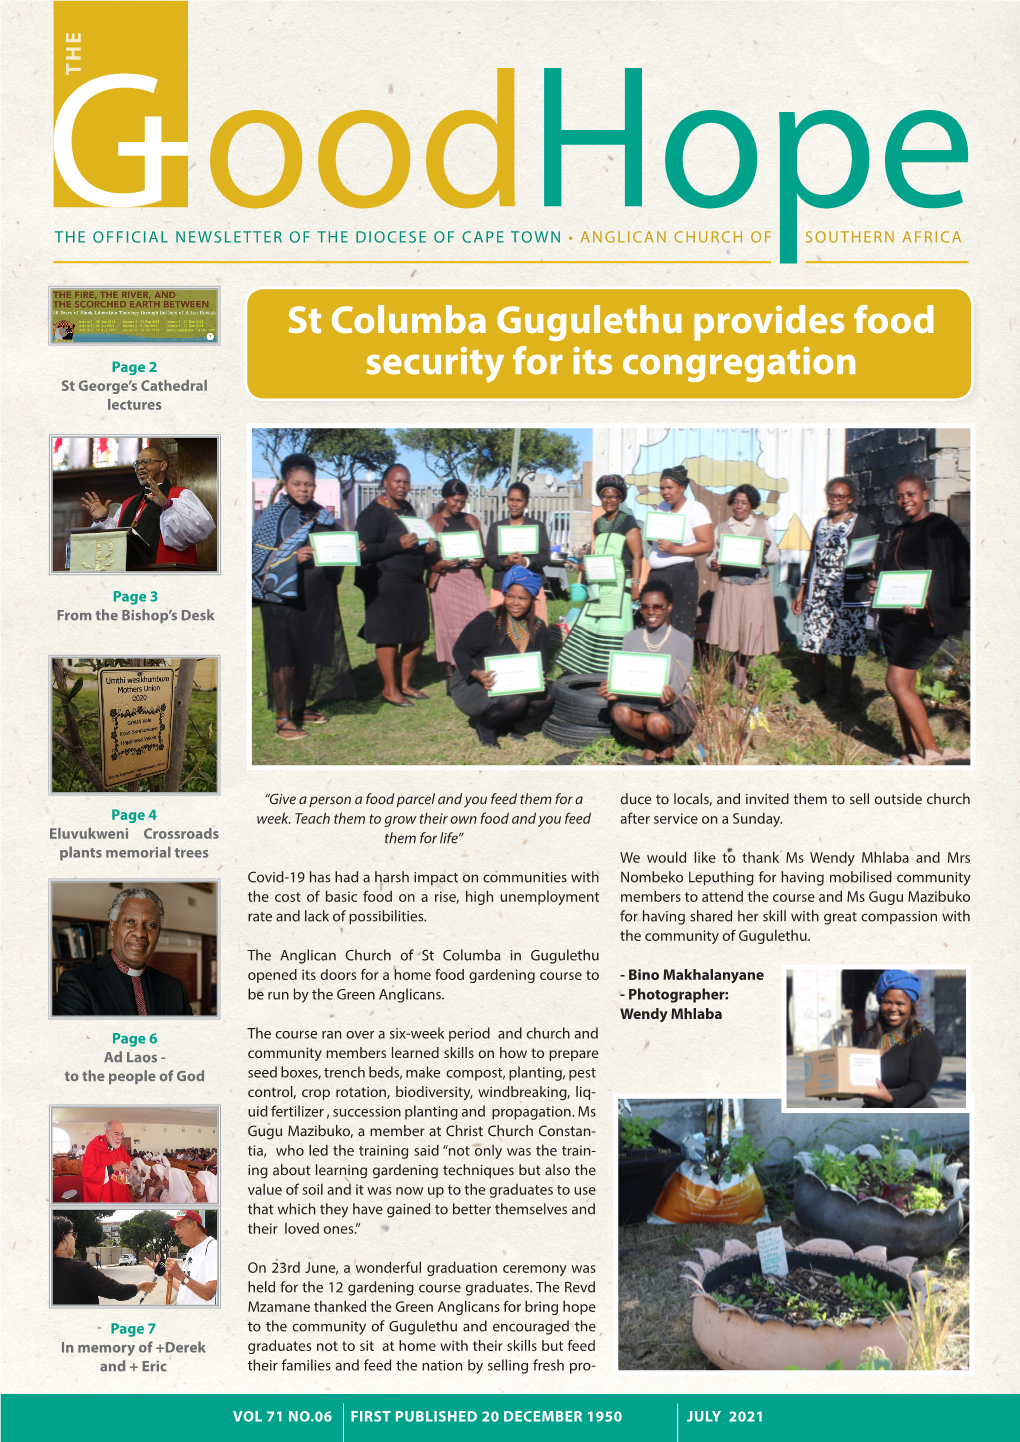 St Columba Gugulethu Provides Food Security for Its Congregation